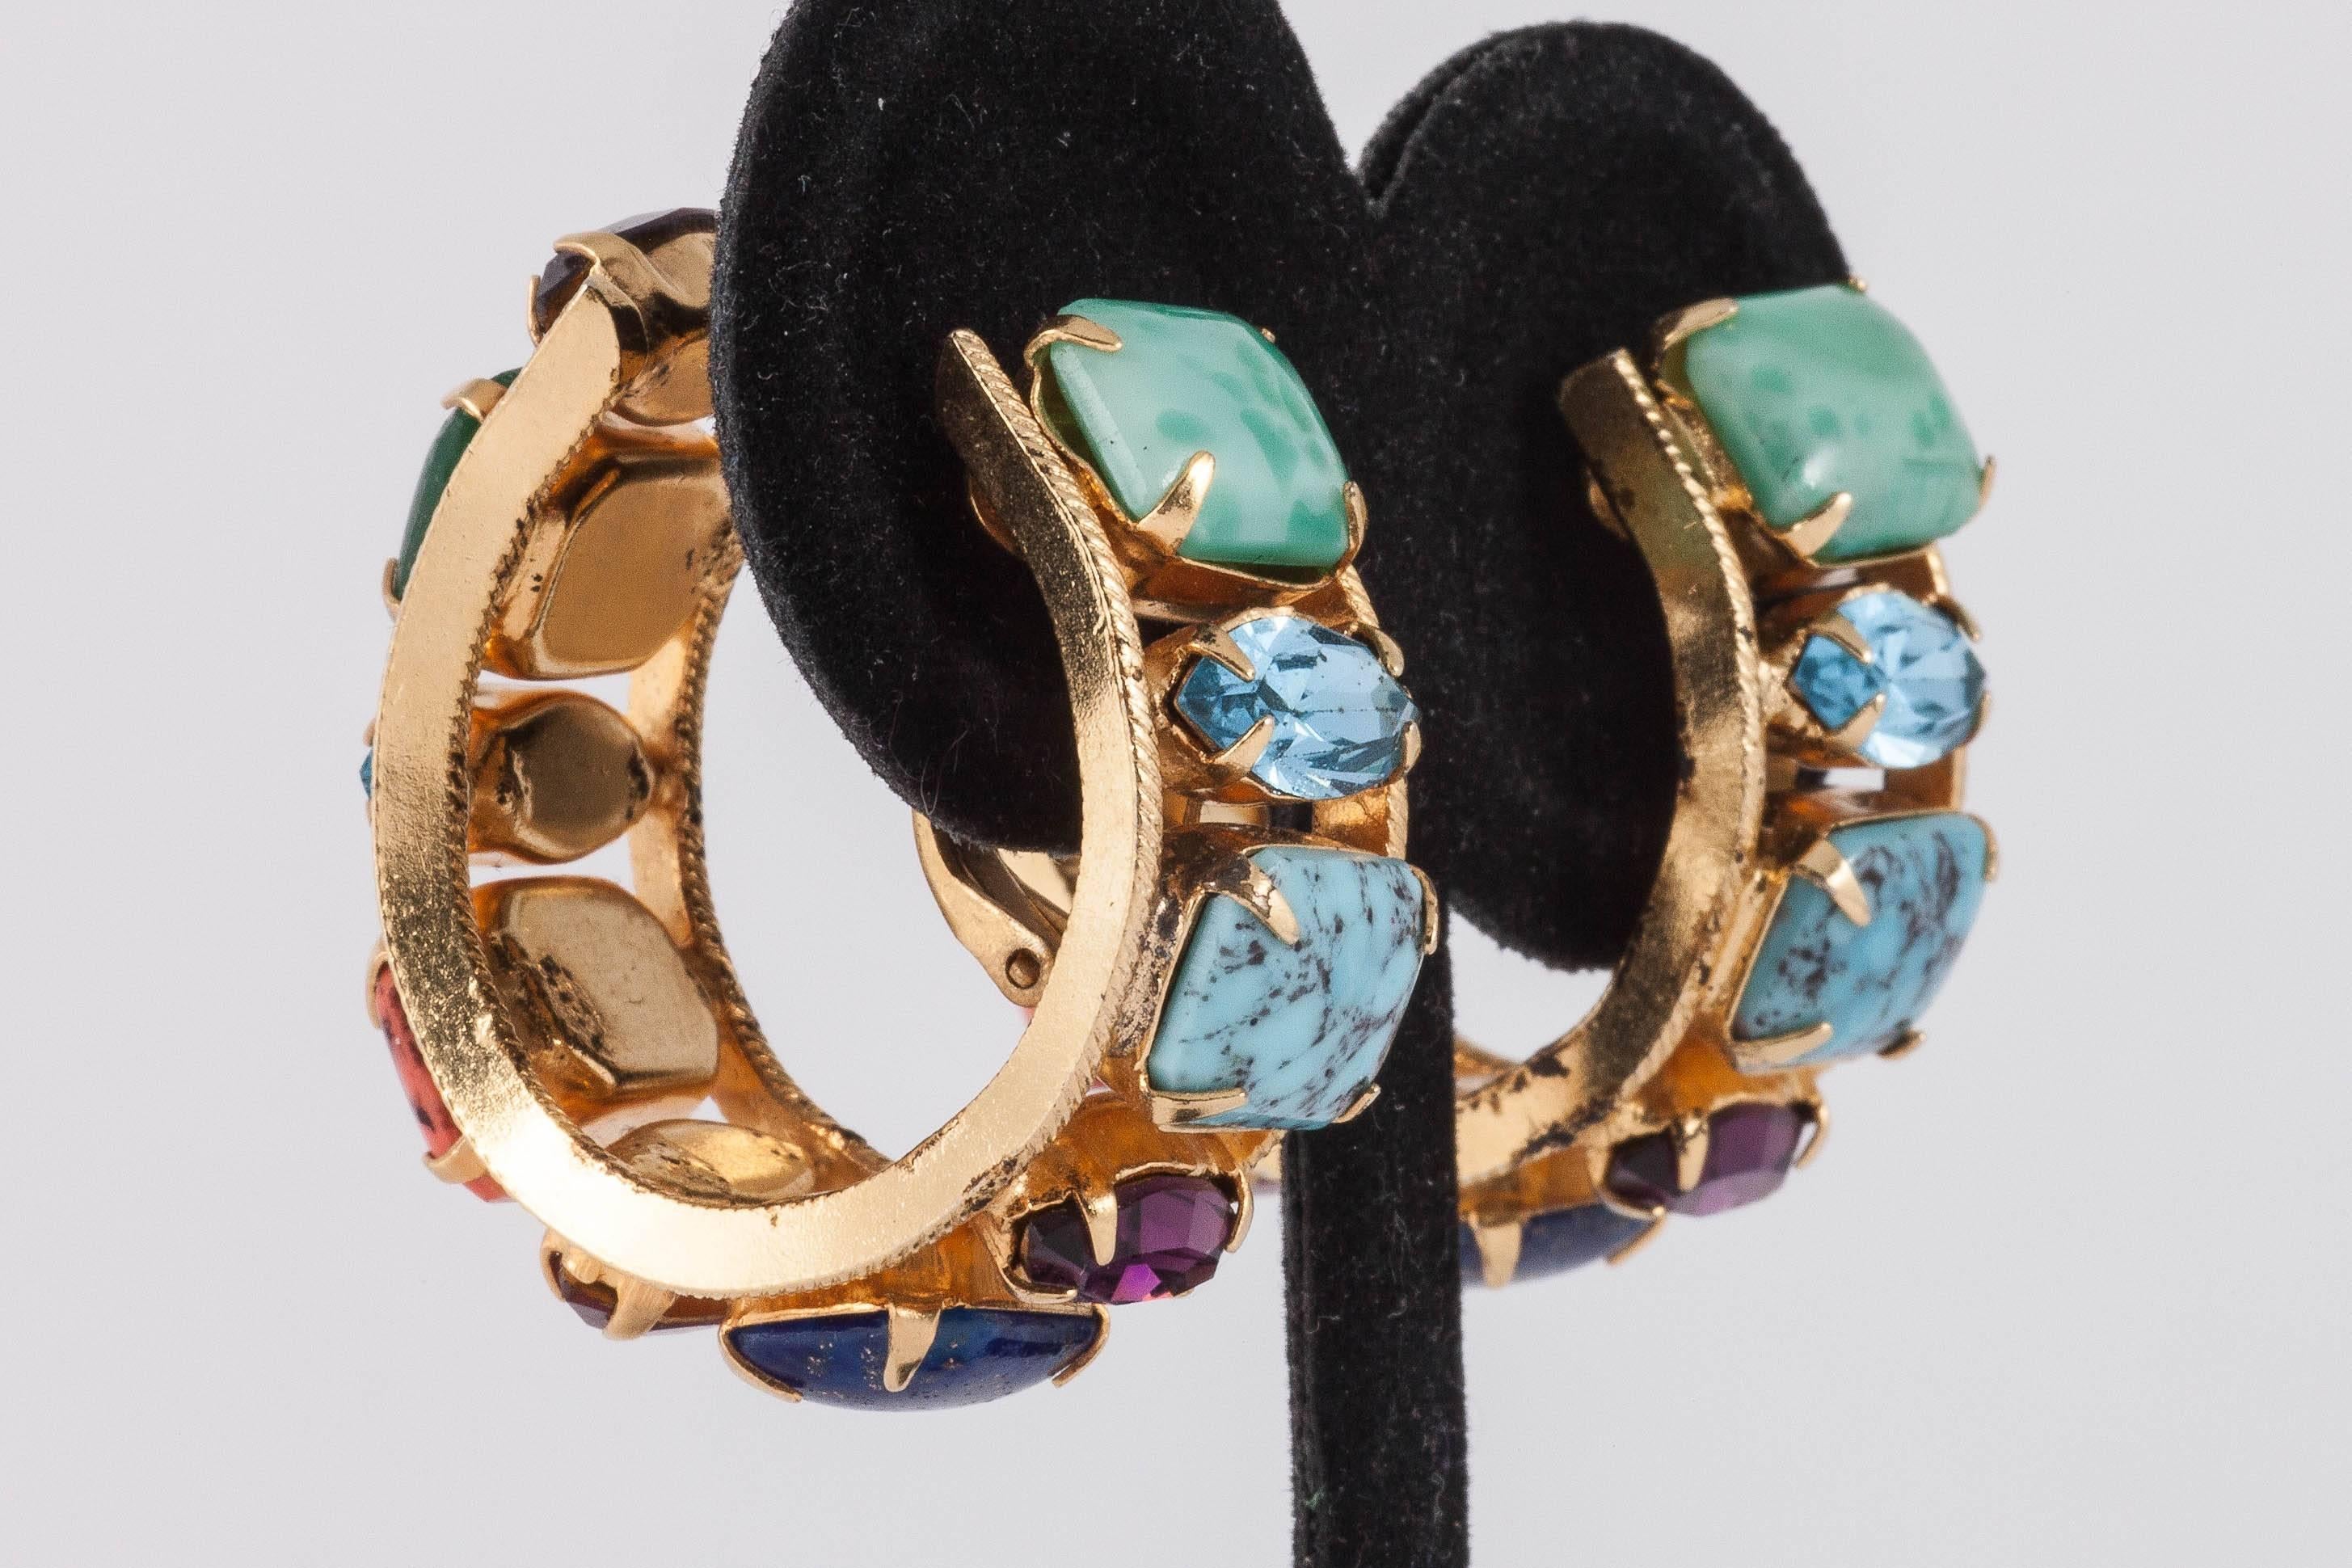 These earrings by favorite maker Henry Schreiner have an ingenious hidden clip which allows the earrings to sit snugly on the lobe without being a pierced hoop. Employing hand set rhinestone and art glass 'stones' in a riot of colour so typical of